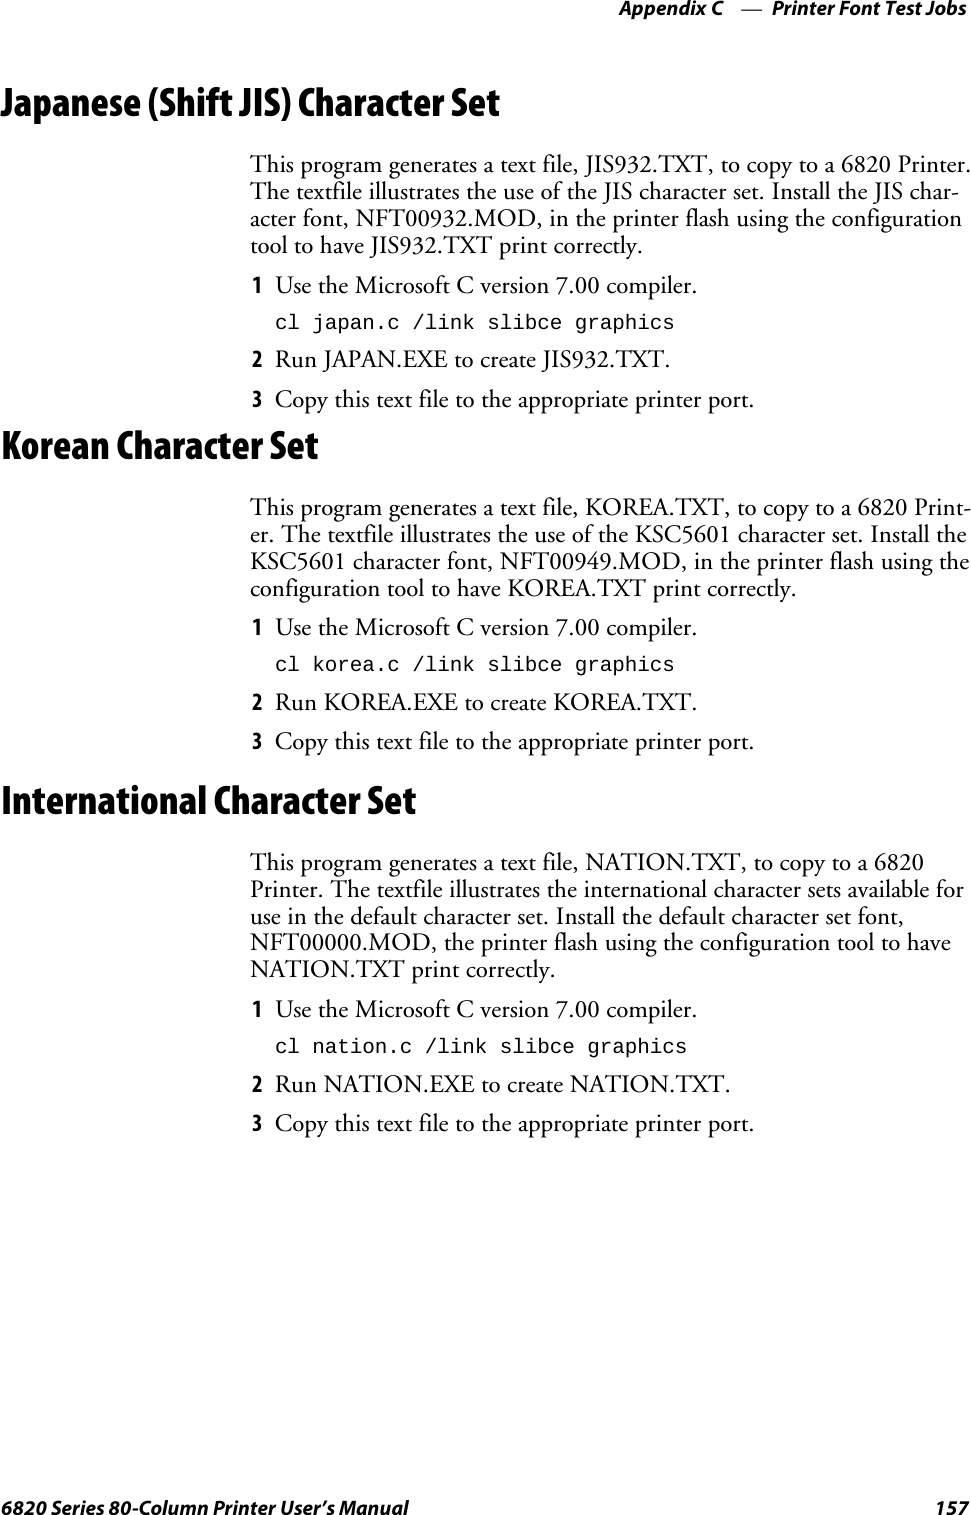 Printer Font Test JobsAppendix —C1576820 Series 80-Column Printer User’s ManualJapanese (Shift JIS) Character SetThis program generates a text file, JIS932.TXT, to copy to a 6820 Printer.The textfile illustrates the use of the JIS character set. Install the JIS char-acter font, NFT00932.MOD, in the printer flash using the configurationtool to have JIS932.TXT print correctly.1Use the Microsoft C version 7.00 compiler.cl japan.c /link slibce graphics2Run JAPAN.EXE to create JIS932.TXT.3Copy this text file to the appropriate printer port.Korean Character SetThis program generates a text file, KOREA.TXT, to copy to a 6820 Print-er. The textfile illustrates the use of the KSC5601 character set. Install theKSC5601 character font, NFT00949.MOD, in the printer flash using theconfiguration tool to have KOREA.TXT print correctly.1Use the Microsoft C version 7.00 compiler.cl korea.c /link slibce graphics2Run KOREA.EXE to create KOREA.TXT.3Copy this text file to the appropriate printer port.International Character SetThis program generates a text file, NATION.TXT, to copy to a 6820Printer. The textfile illustrates the international character sets available foruse in the default character set. Install the default character set font,NFT00000.MOD, the printer flash using the configuration tool to haveNATION.TXT print correctly.1Use the Microsoft C version 7.00 compiler.cl nation.c /link slibce graphics2Run NATION.EXE to create NATION.TXT.3Copy this text file to the appropriate printer port.